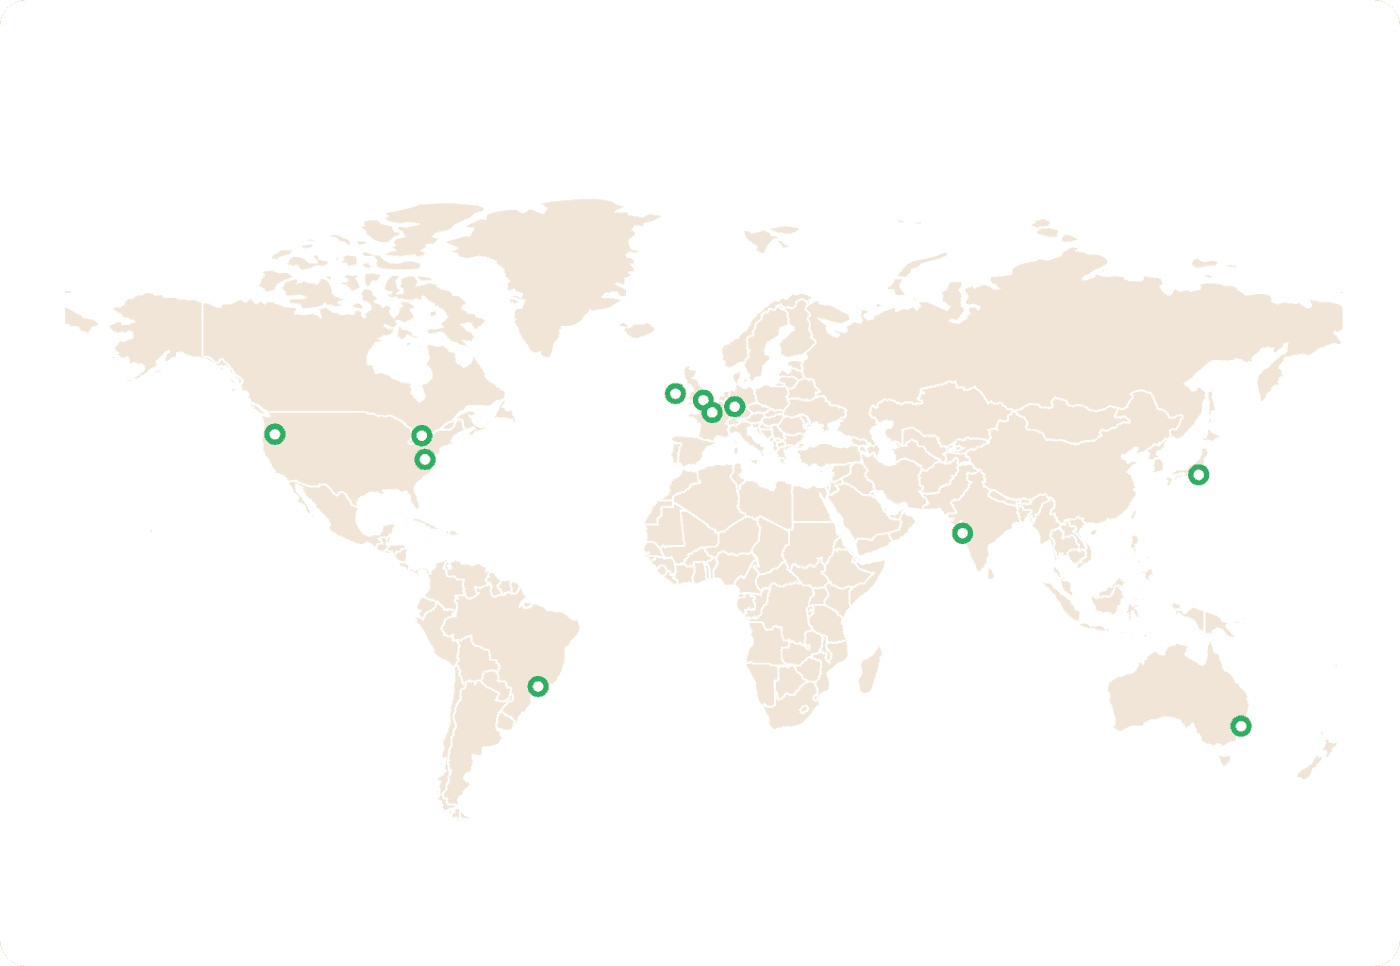 Multi-geo support with AWS storage regions